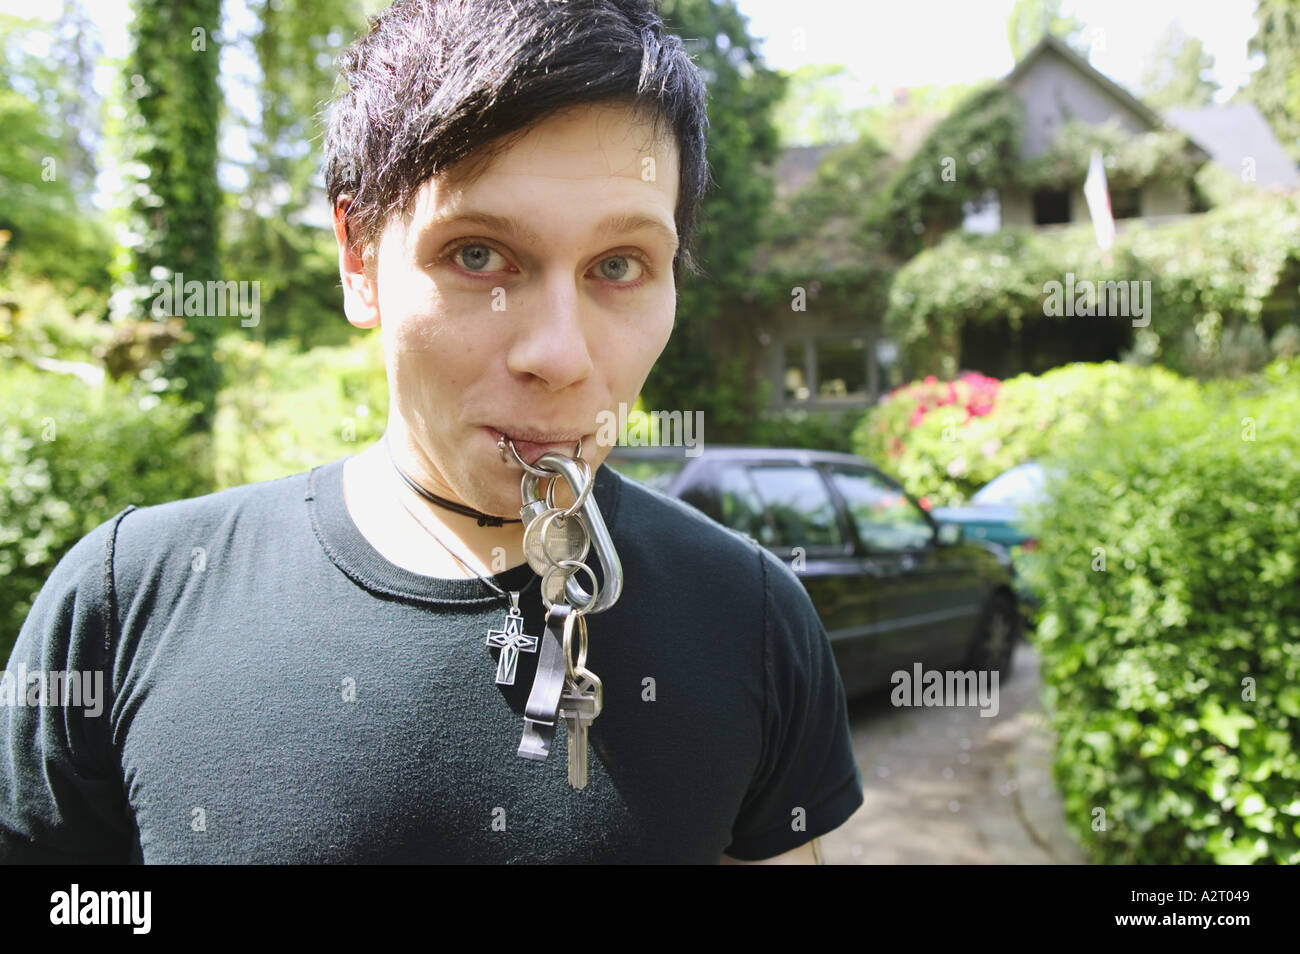 A punky male and his car keys Stock Photo